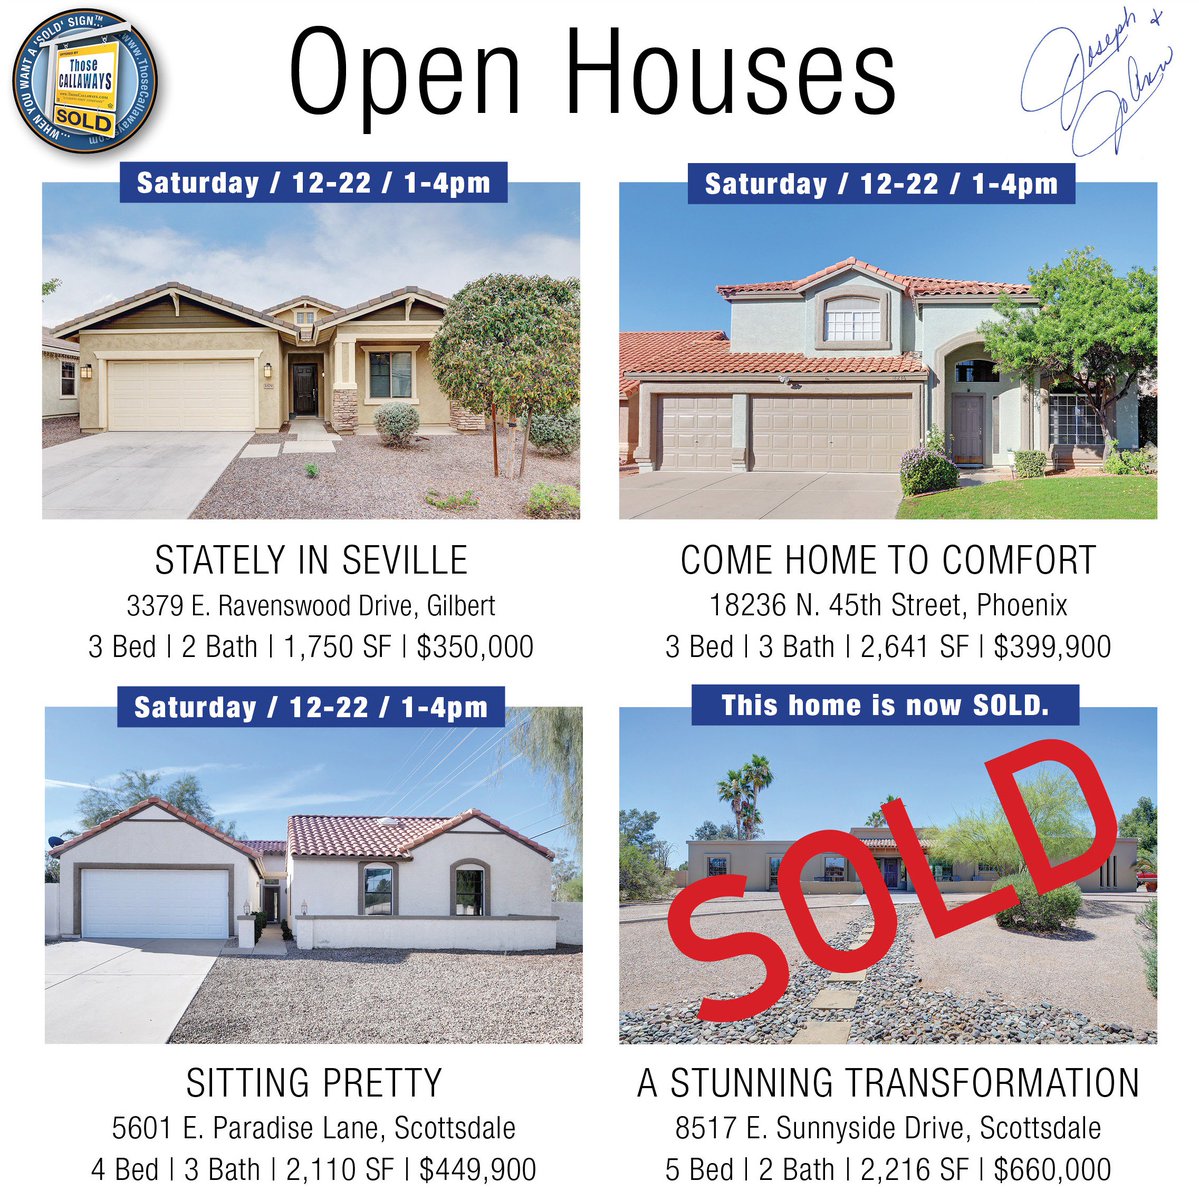 A stately home with a new back yard, a move-in-ready two story, and a corner-lot home in the Magic Zip Code. bit.ly/2rQnXhv 

#Gilbertrealestate #Gilbertopenhouse #Phoenixrealestate #Phoenixopenhouse #Scottsdalerealstate #Scottsdaleopenhouse